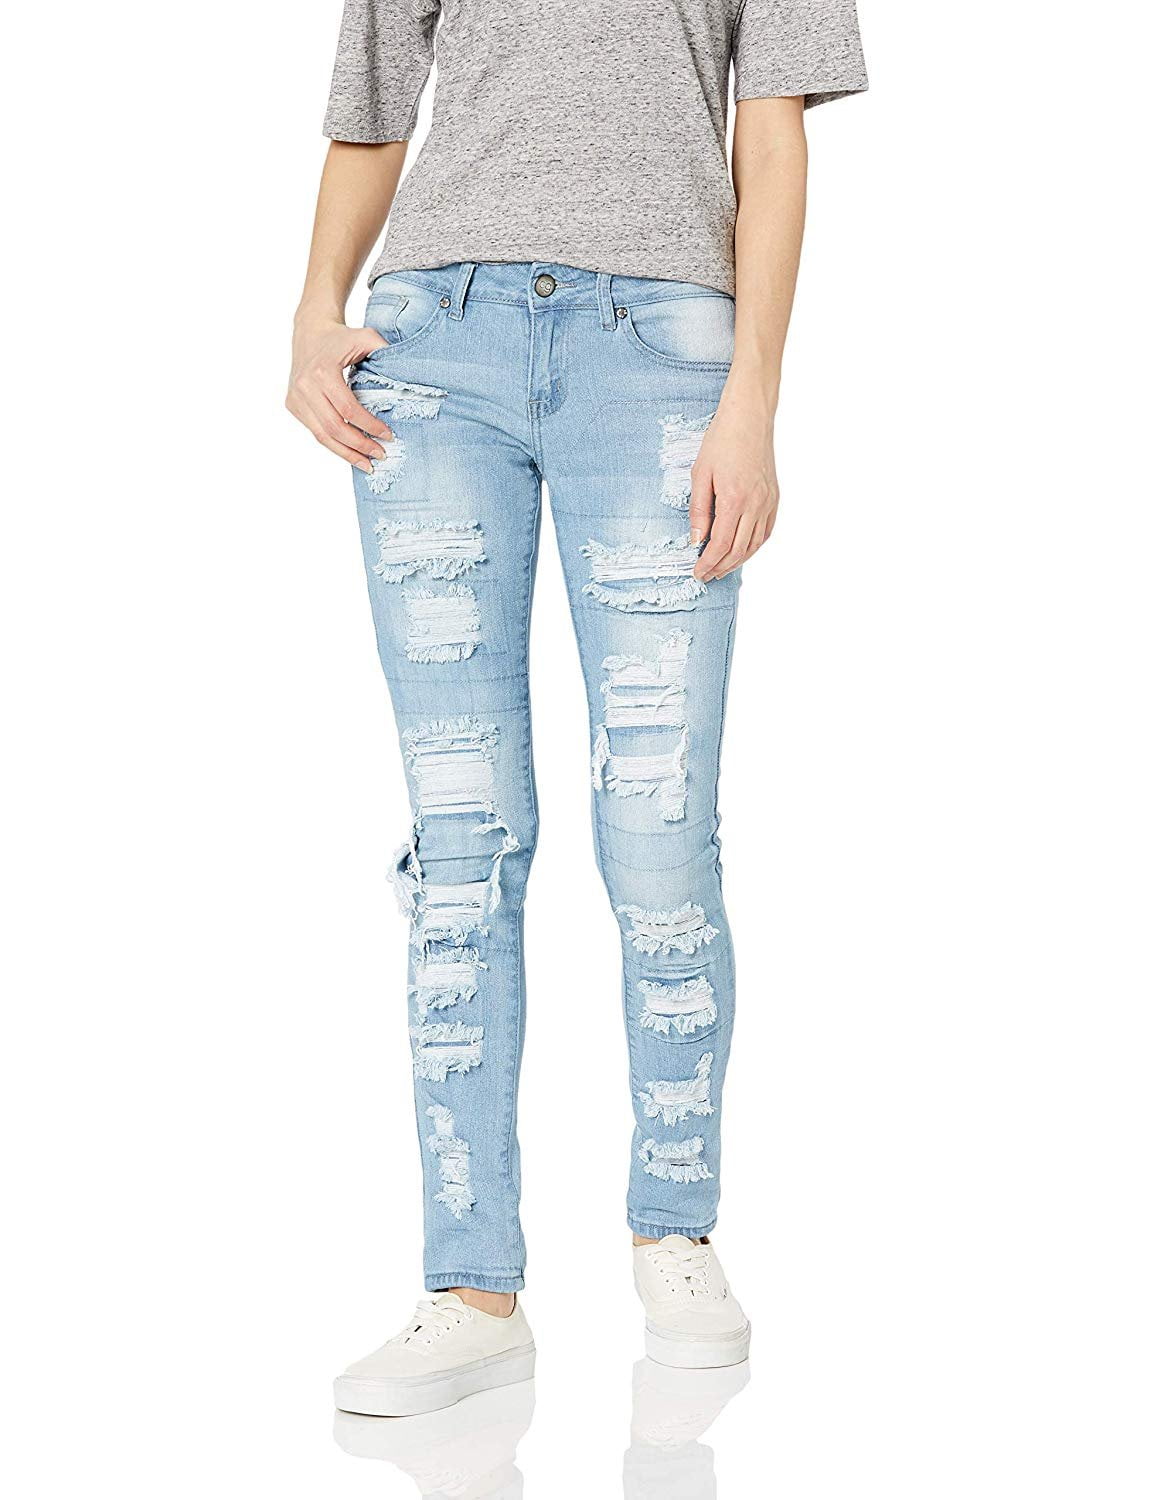 light ripped jeans